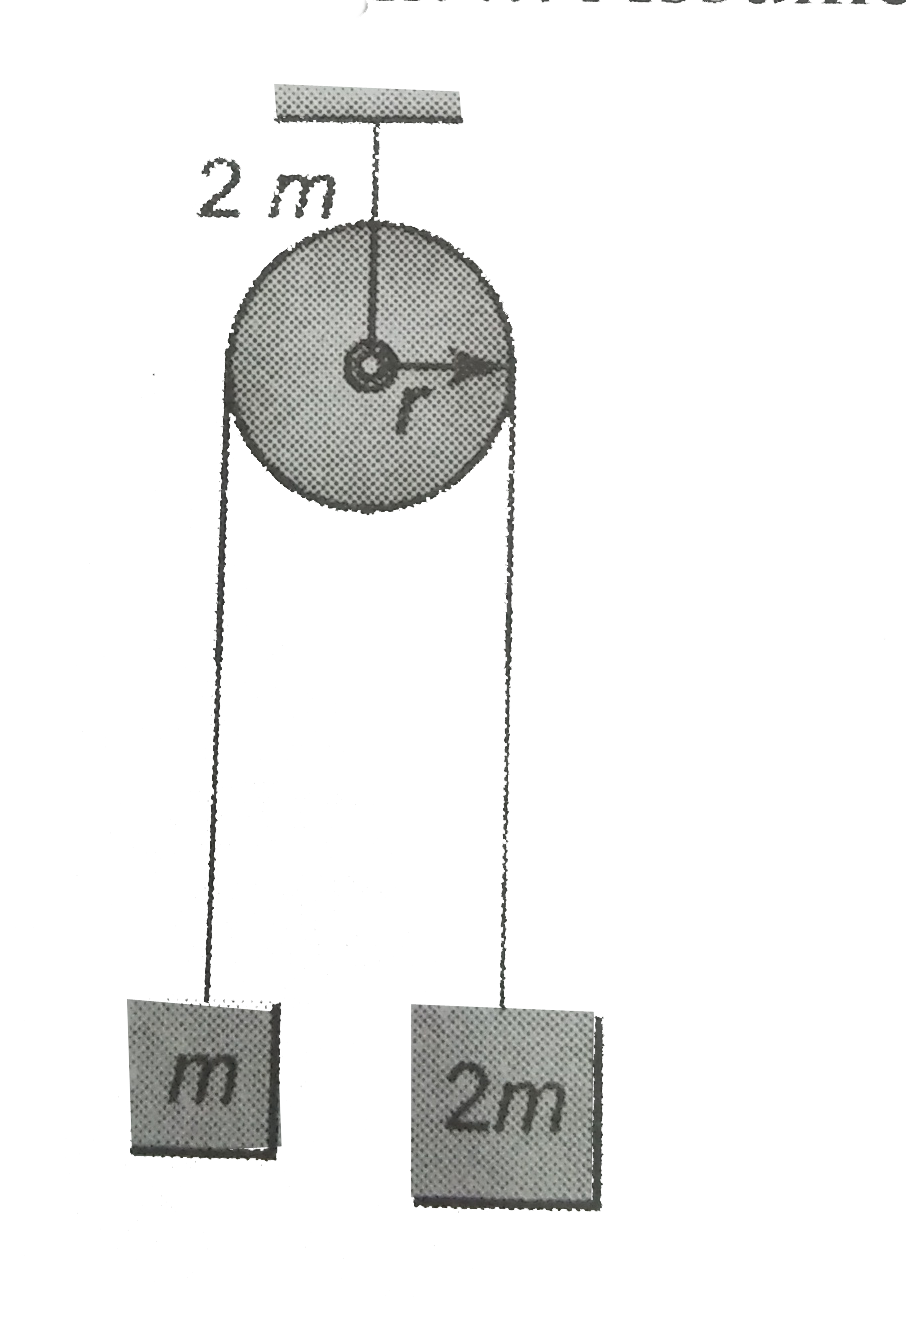 Two blocks of masses 2m and m are connected by a light string going over a pulley of mass 2m and radius R as shown in the figure. The system is released from rest. Find the angular momentum of system when the mass 2m has descended through a height h. Assume no slipping.